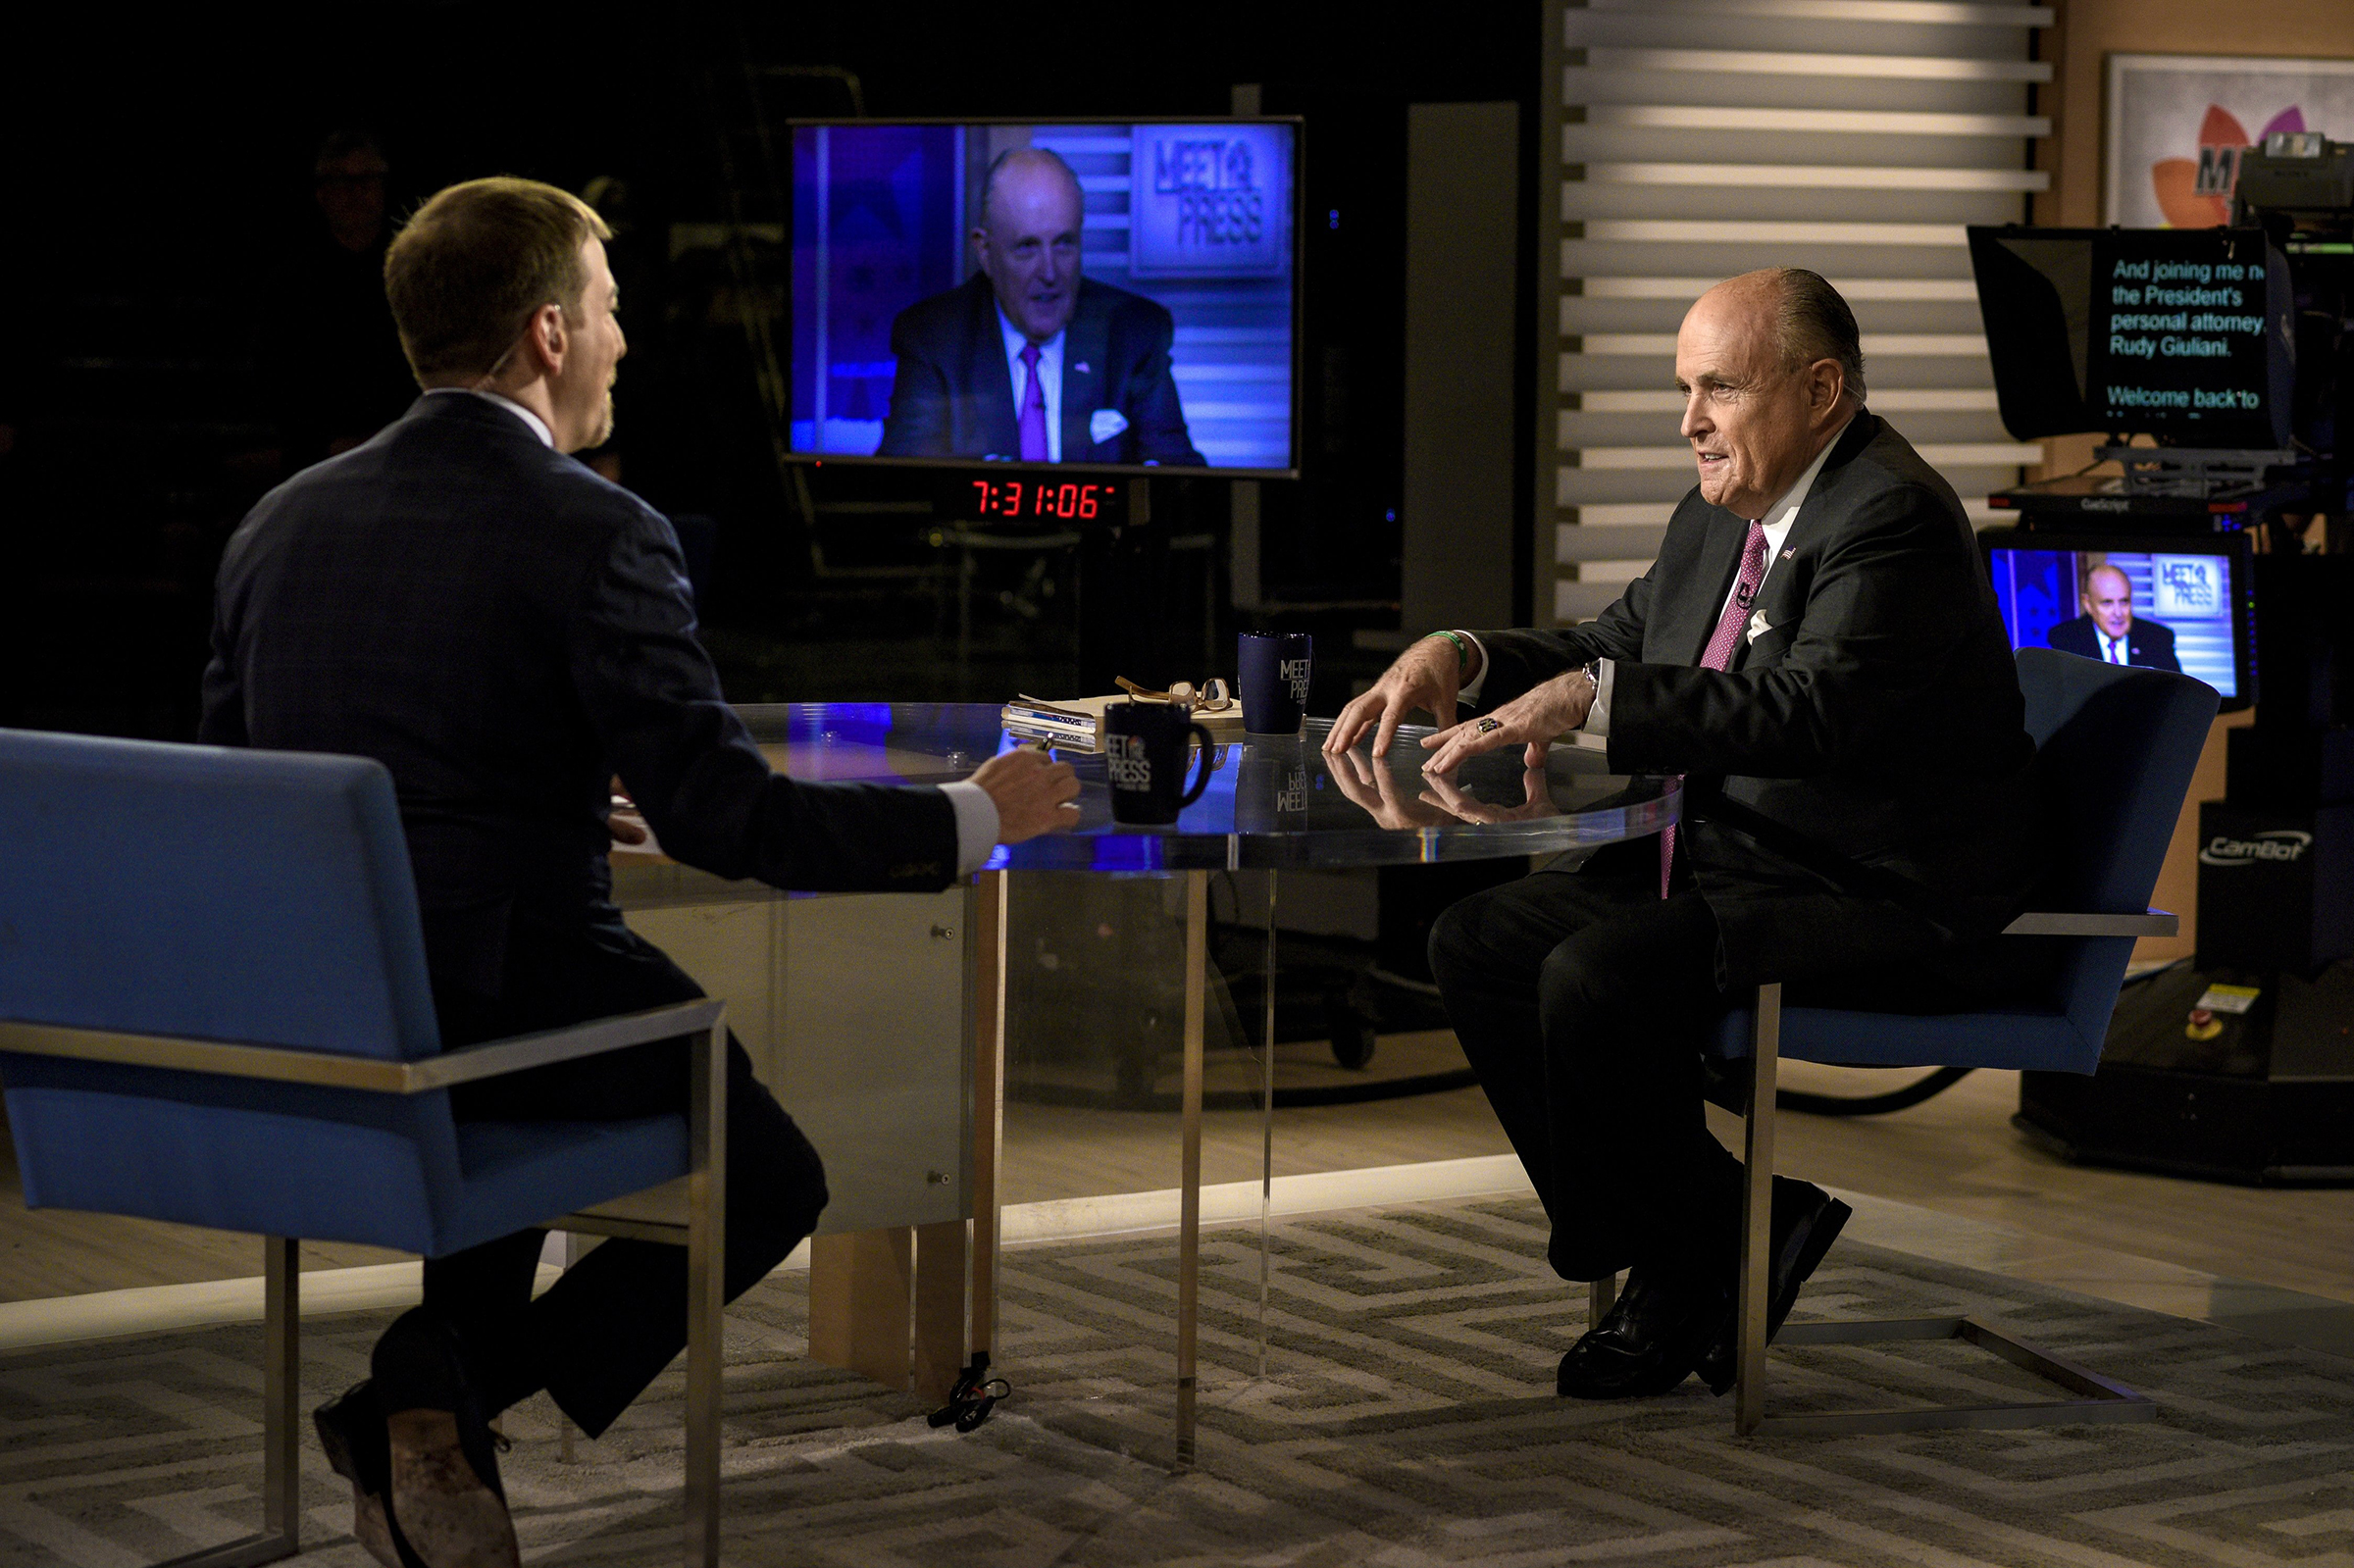 Rudy Giuliani, a personal lawyer for President Trump, appears on "Meet the Press" in Washington, D.C., on April 21, 2019. (William B. Plowman—NBC NewsWire/Getty Images)